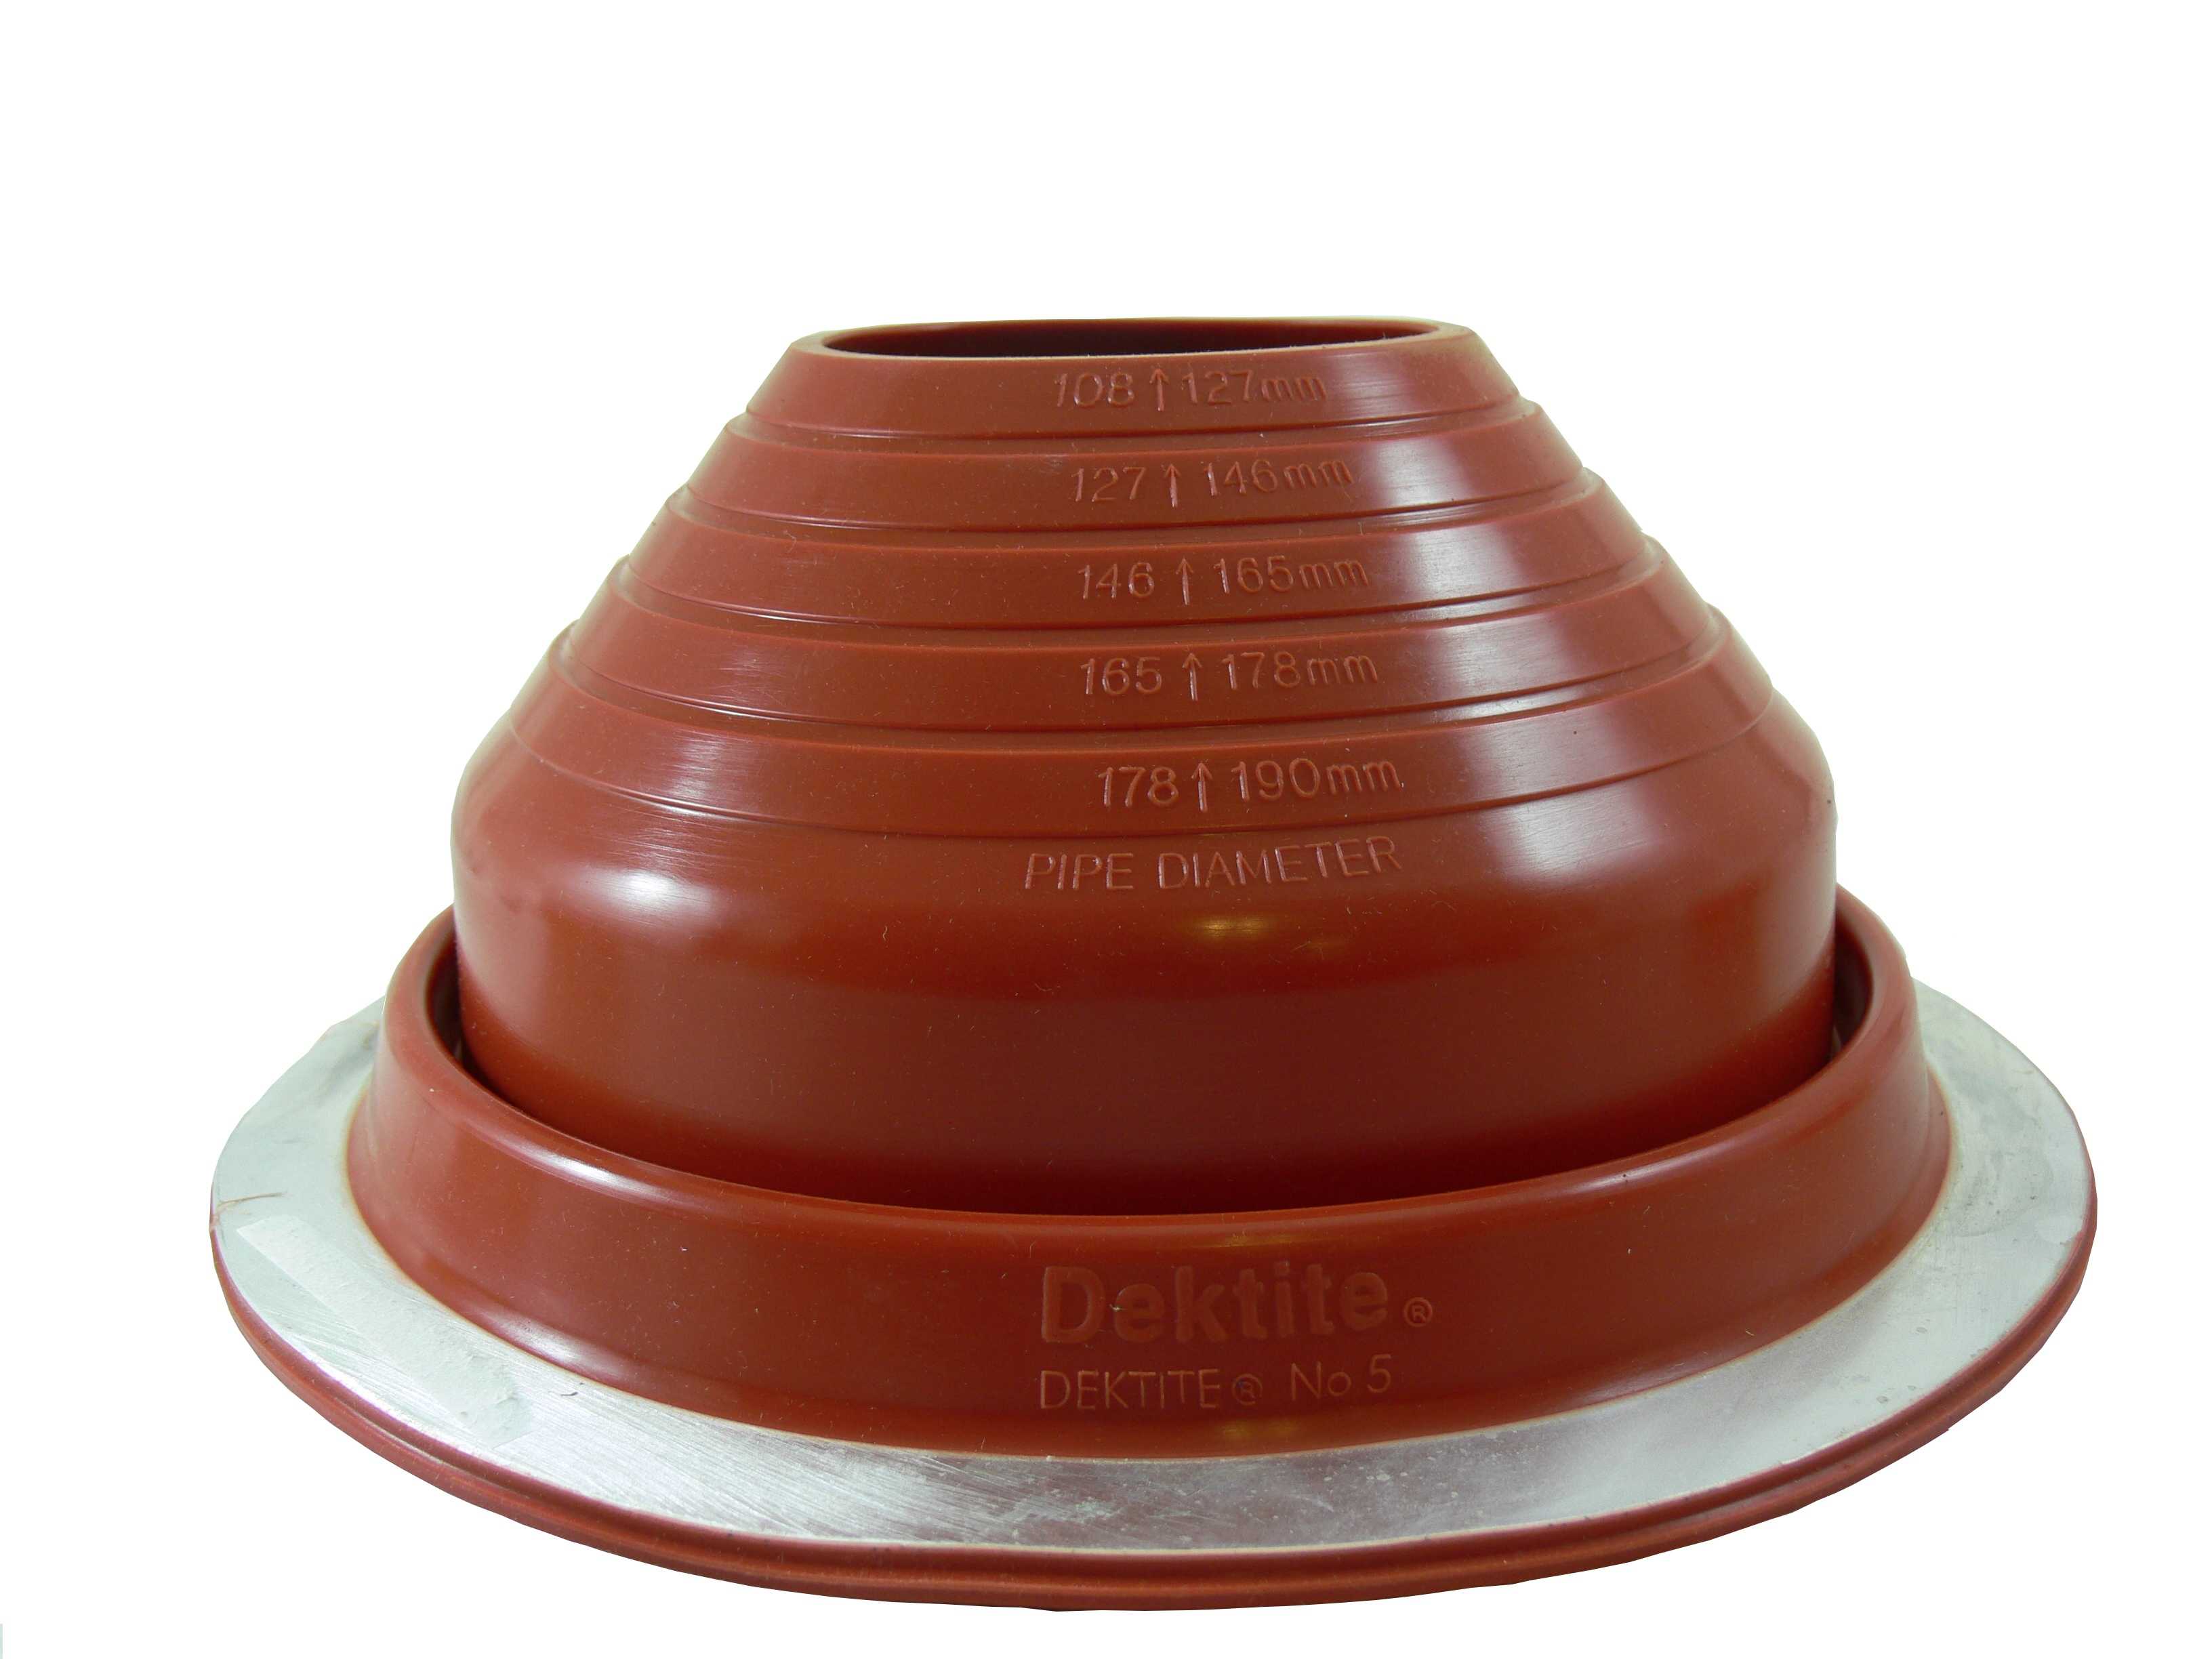 DEKTITE ROUND BASE METAL ROOFING PIPE FLASHING BOOT: #5 RED High Temp Silicone Flexible Pipe Flashing Dektite (for OD pipe sizes 4' - 7') - Metal Roof Jack Pipe Boot - Metal Roofing Pipe Flashing